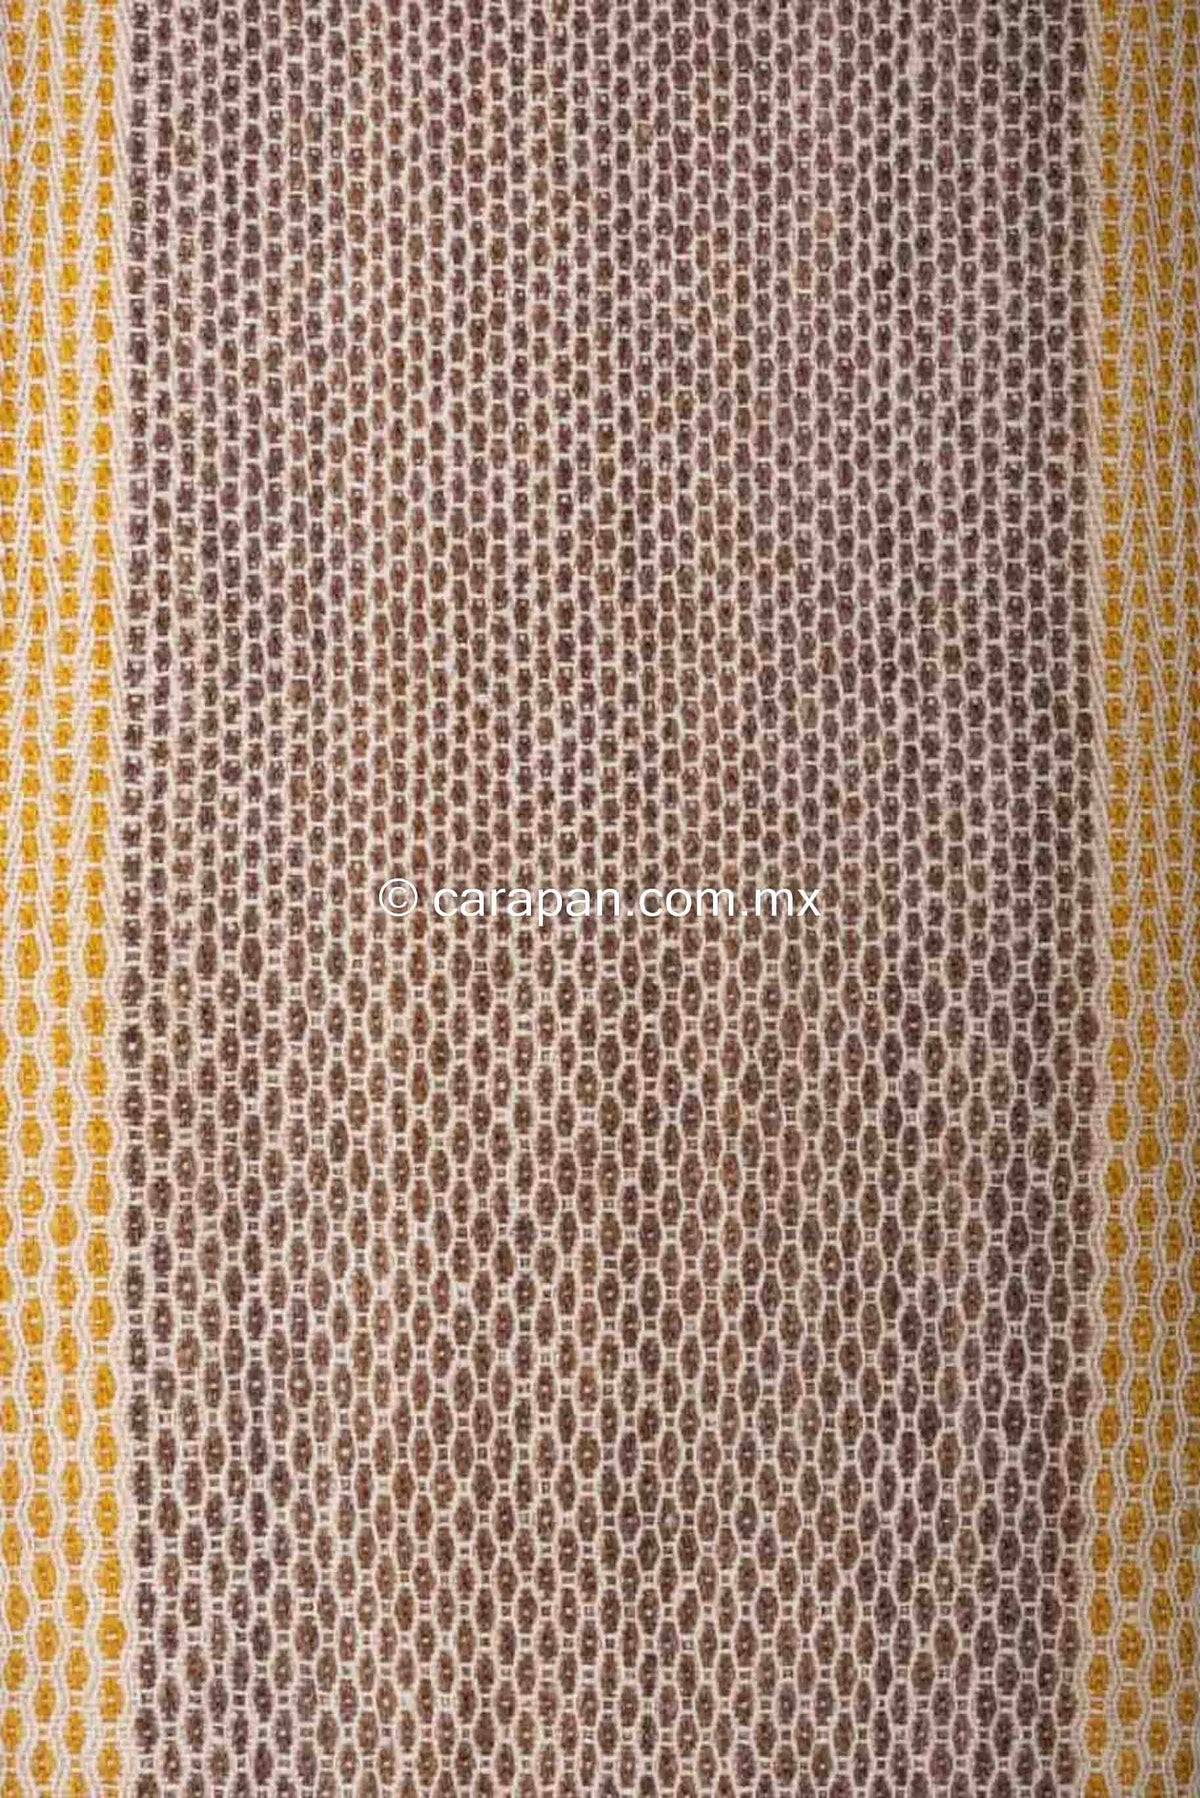 Wool Table Runner with brown diamonds & two yellow stripes on each side